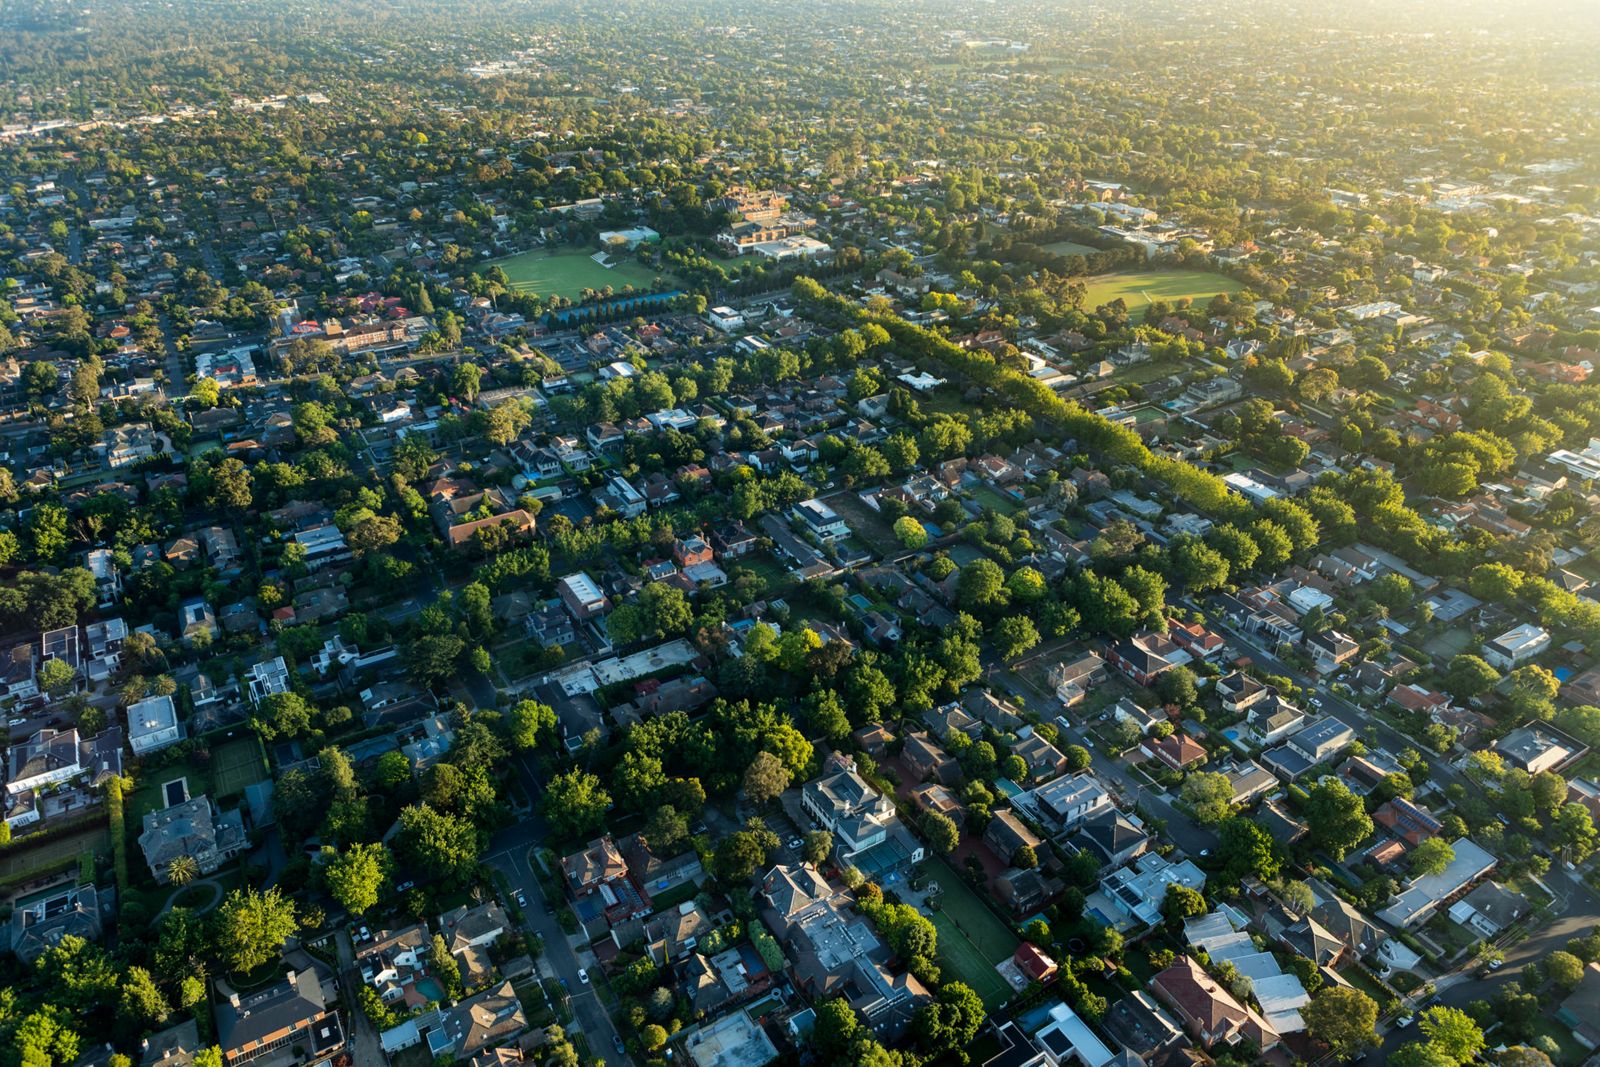 aerial view of suburban neighborhood with houses and buildings and lots of trees throughout